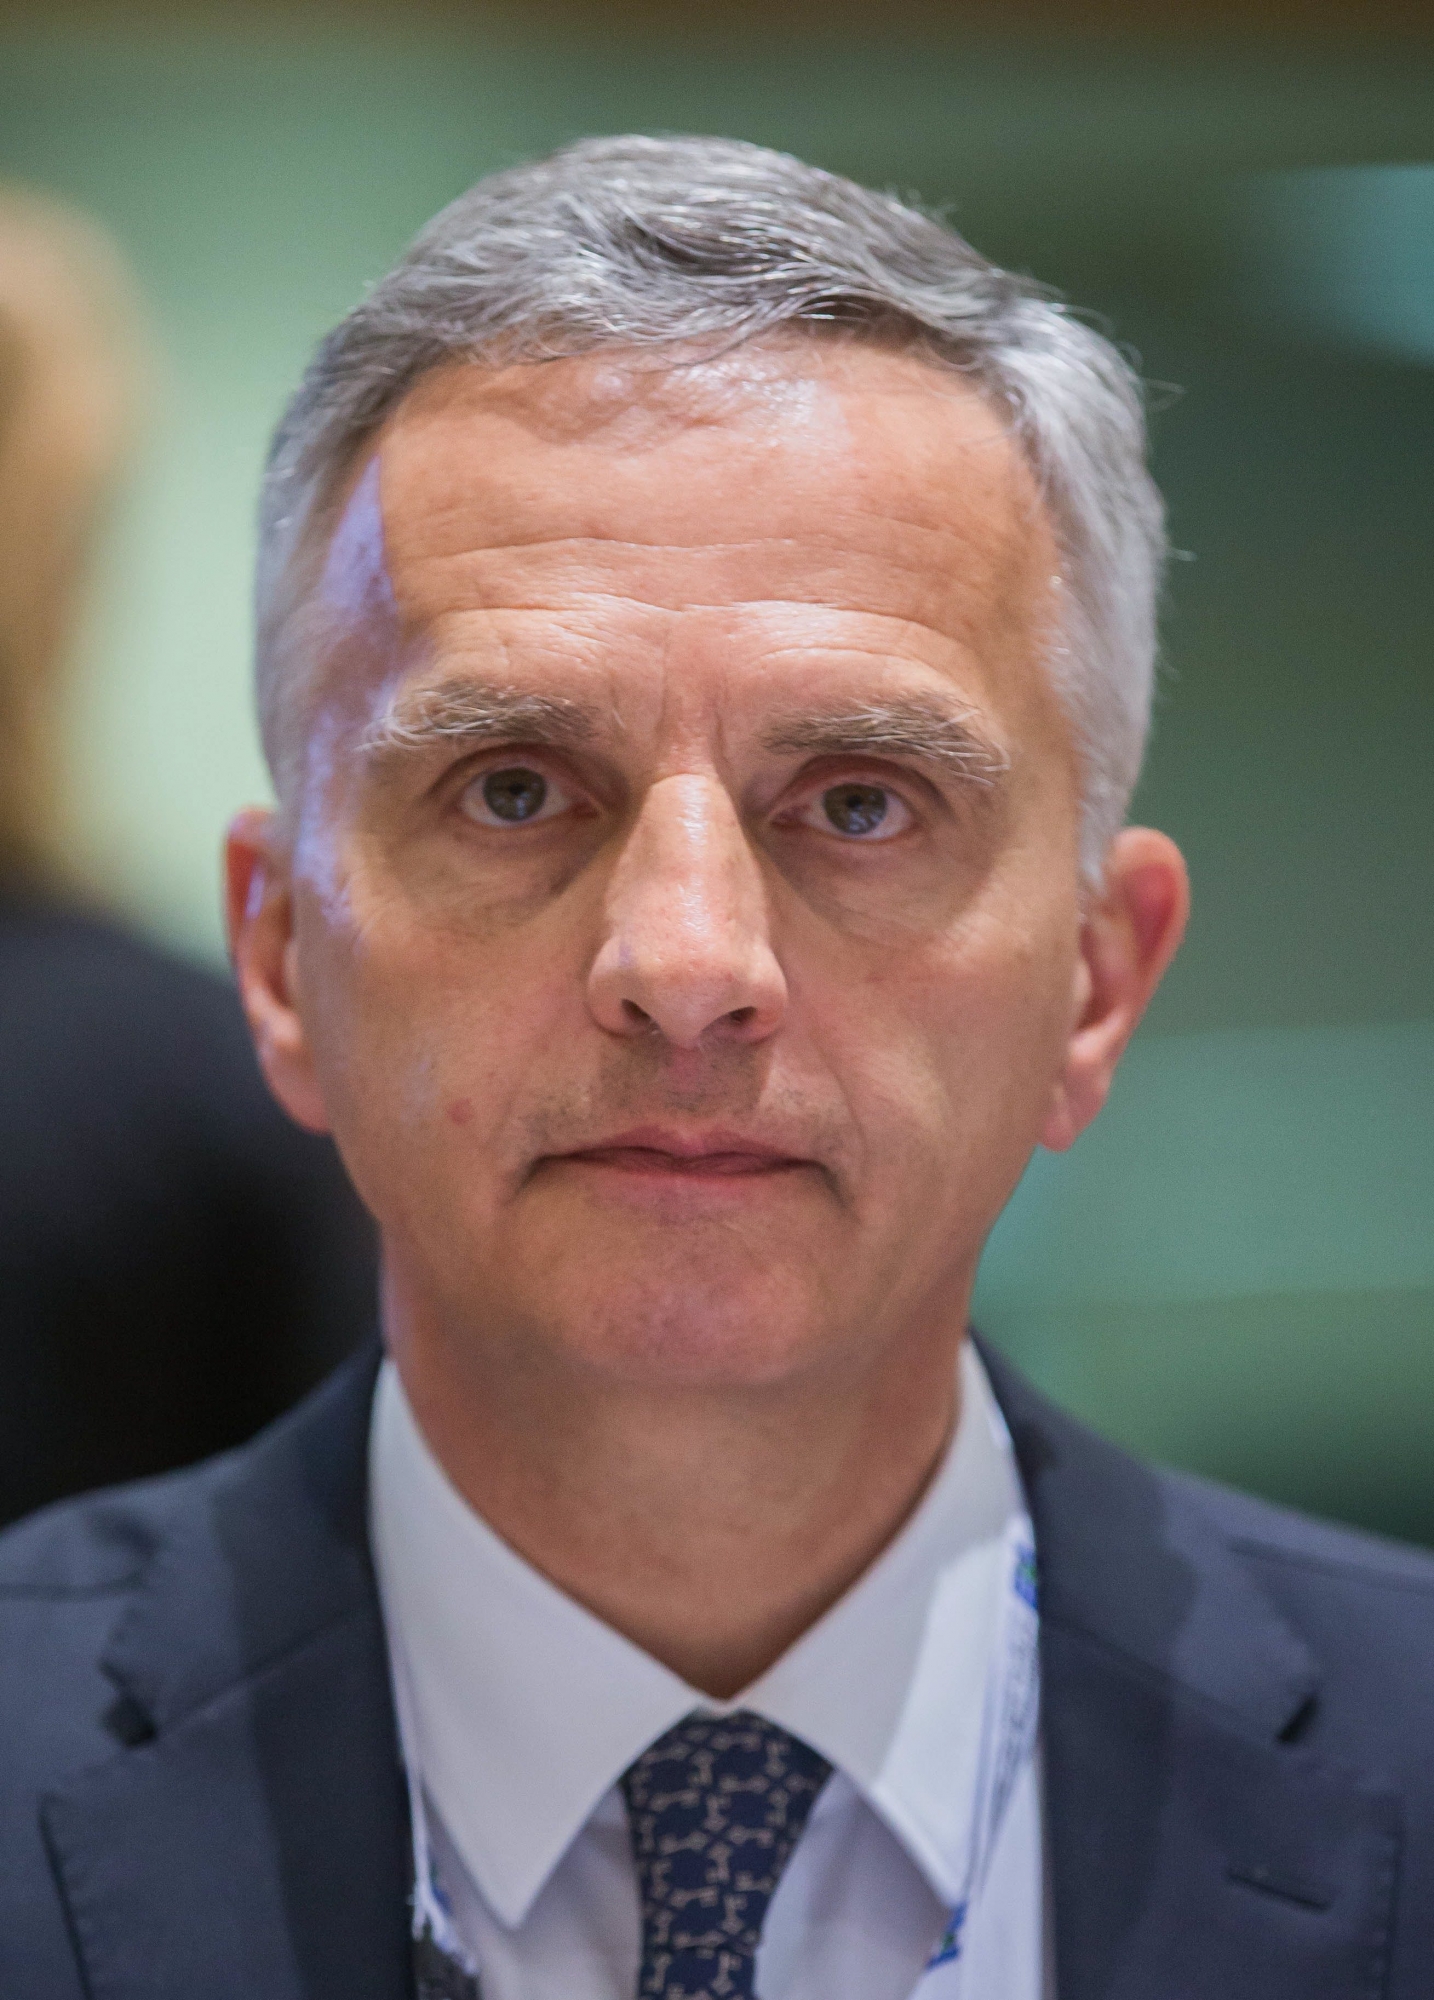 epa05889238 Swiss Foreign Minister Didier Burkhalter looks on during the supporting the future of Syria and the region Brussels conference in Brussels, Belgium, 05 April 2017. The two-day event will be attended by ministerial representatives from 70 delegations, from the EU, the wider international community, the United Nations, major donors and civil society, humanitarian and development organisations. The conference is held to address the situation in Syria and the impact of the crisis in the region.  EPA/STEPHANIE LECOCQ BELGIUM EU SYRIA CONFERENCE